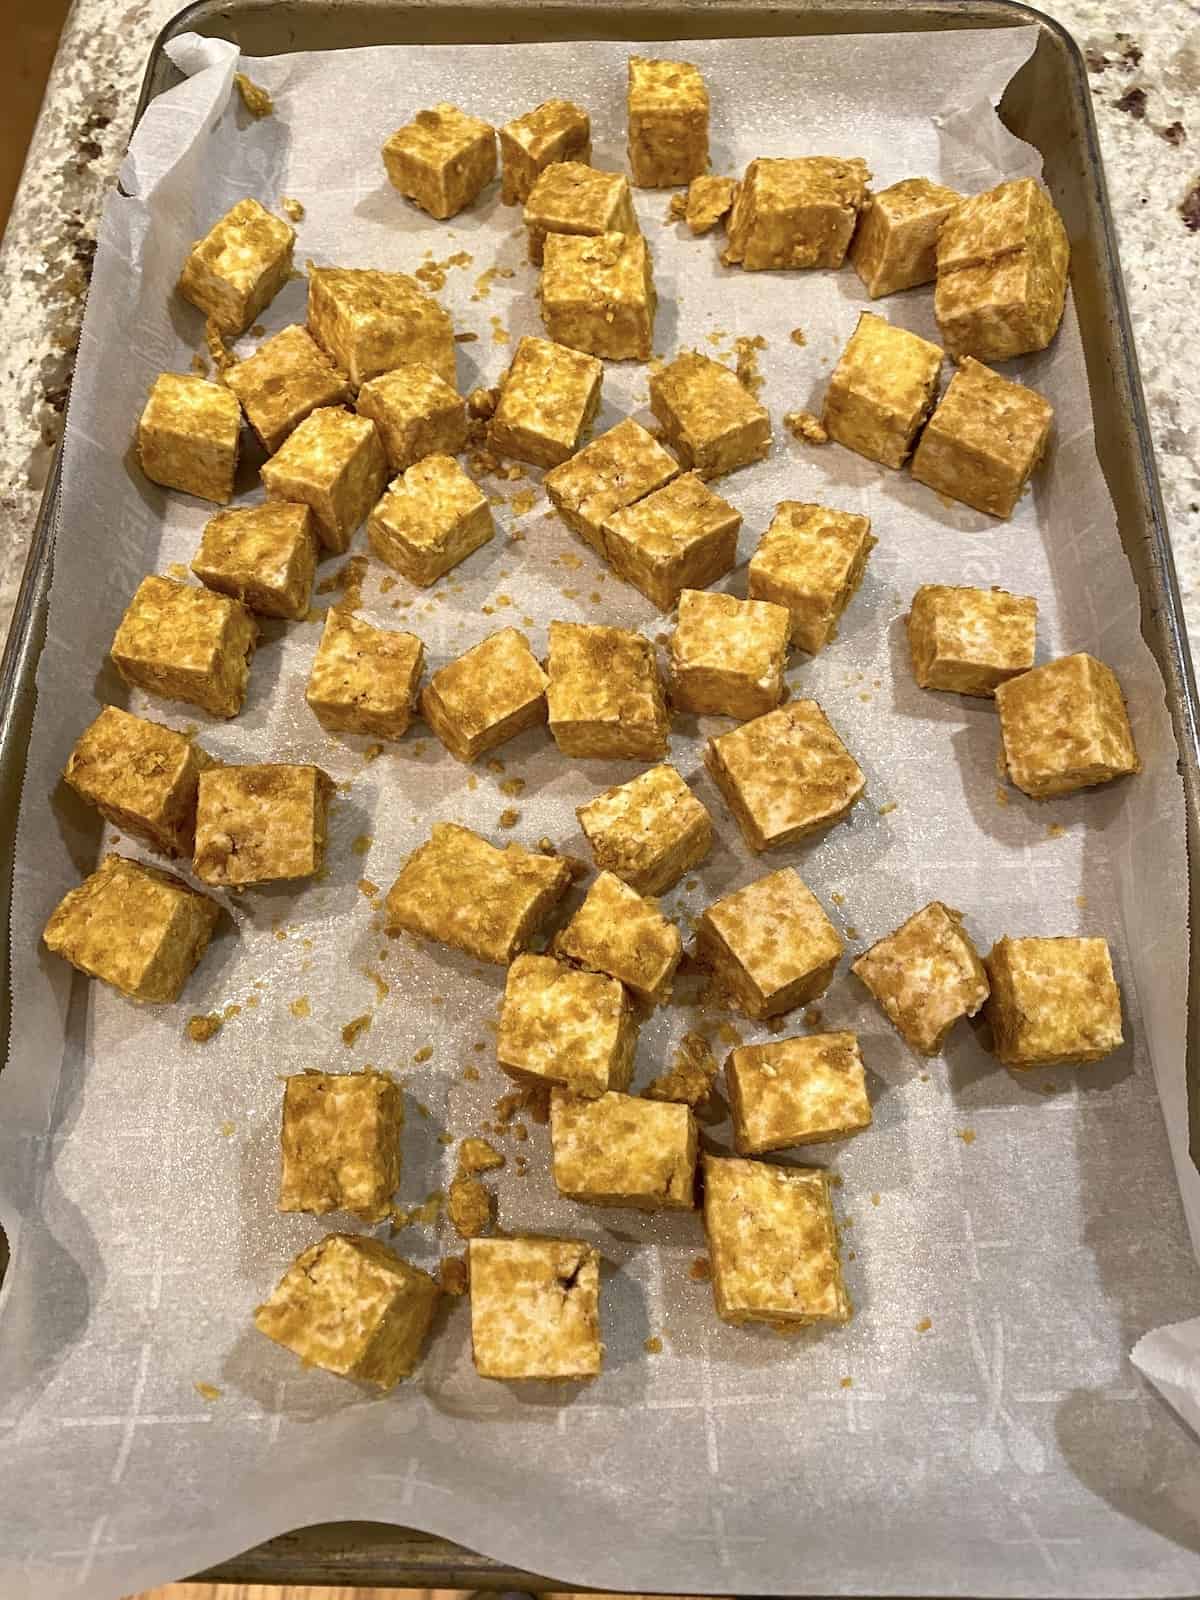 Diced tofu arranged on parchment paper on a baking sheet.